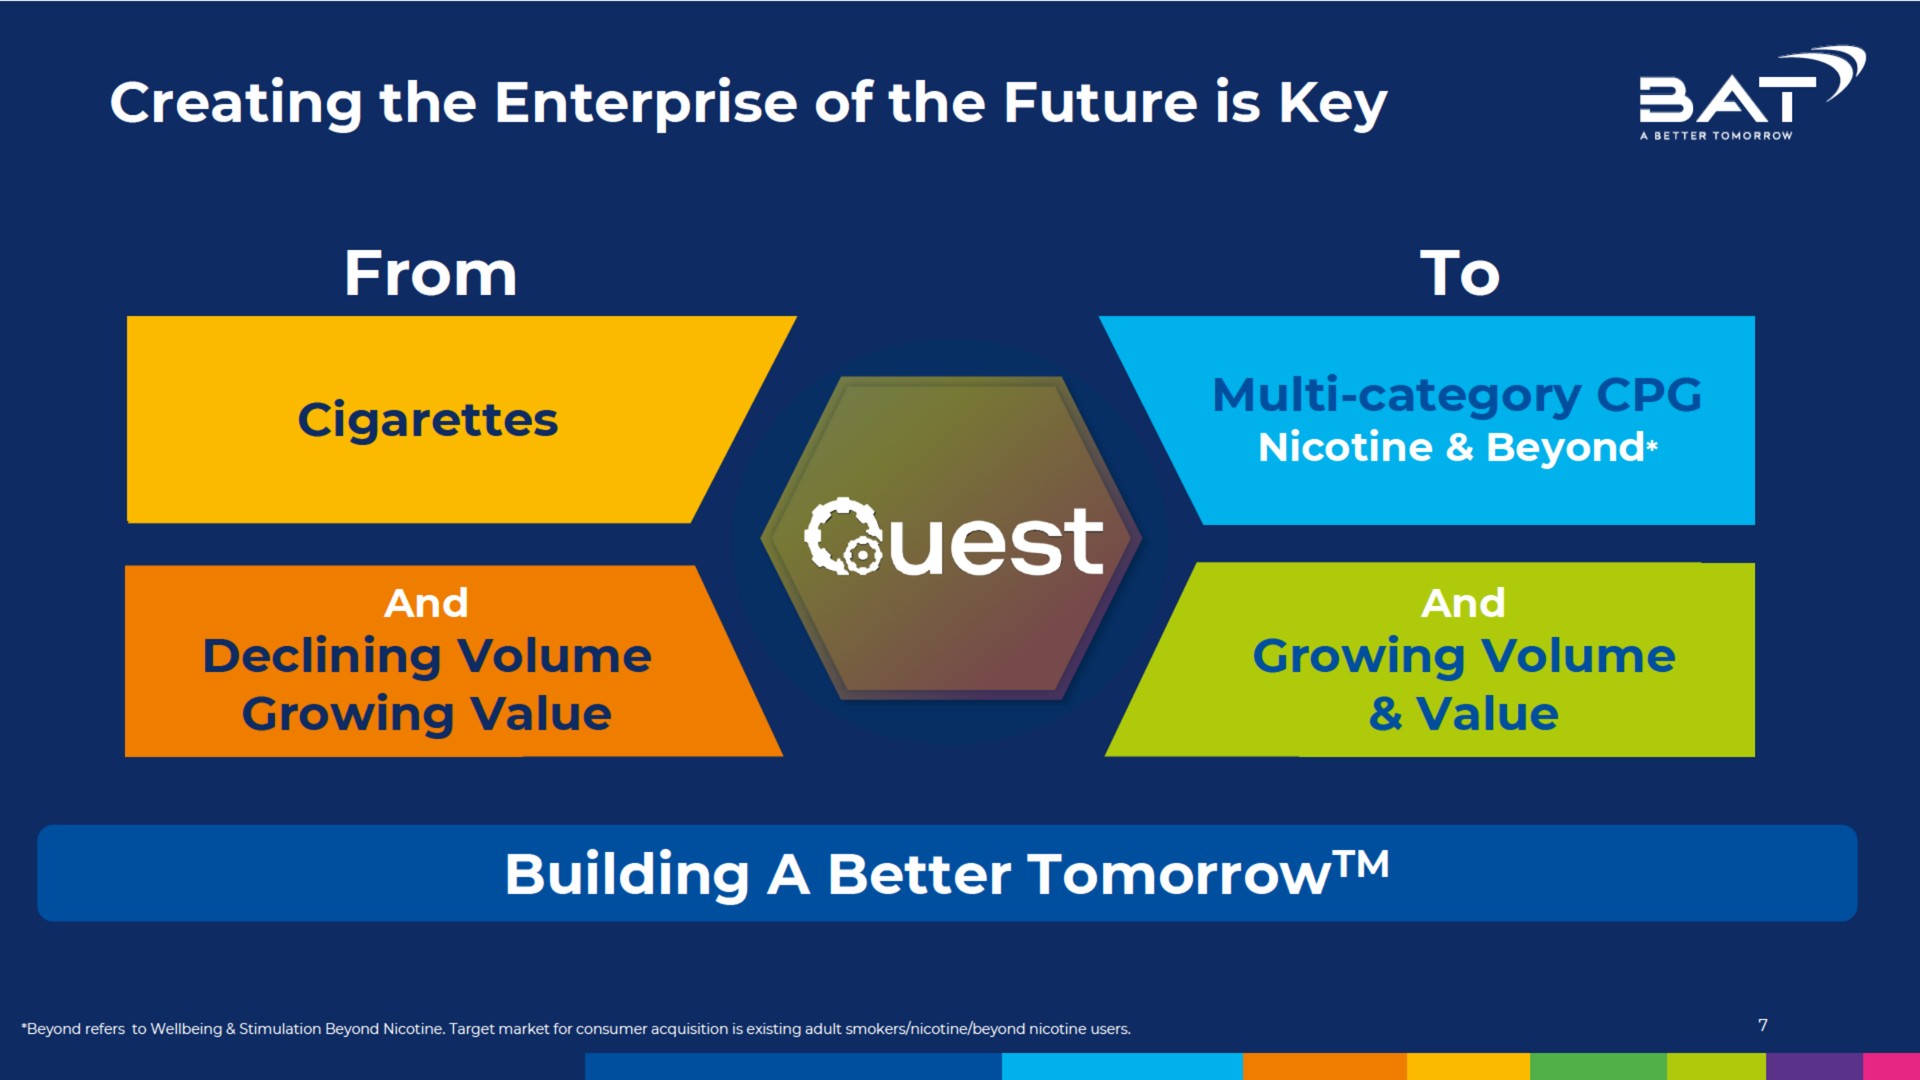 creating the enterprise of the future is key from building a better tomorrow | BAT